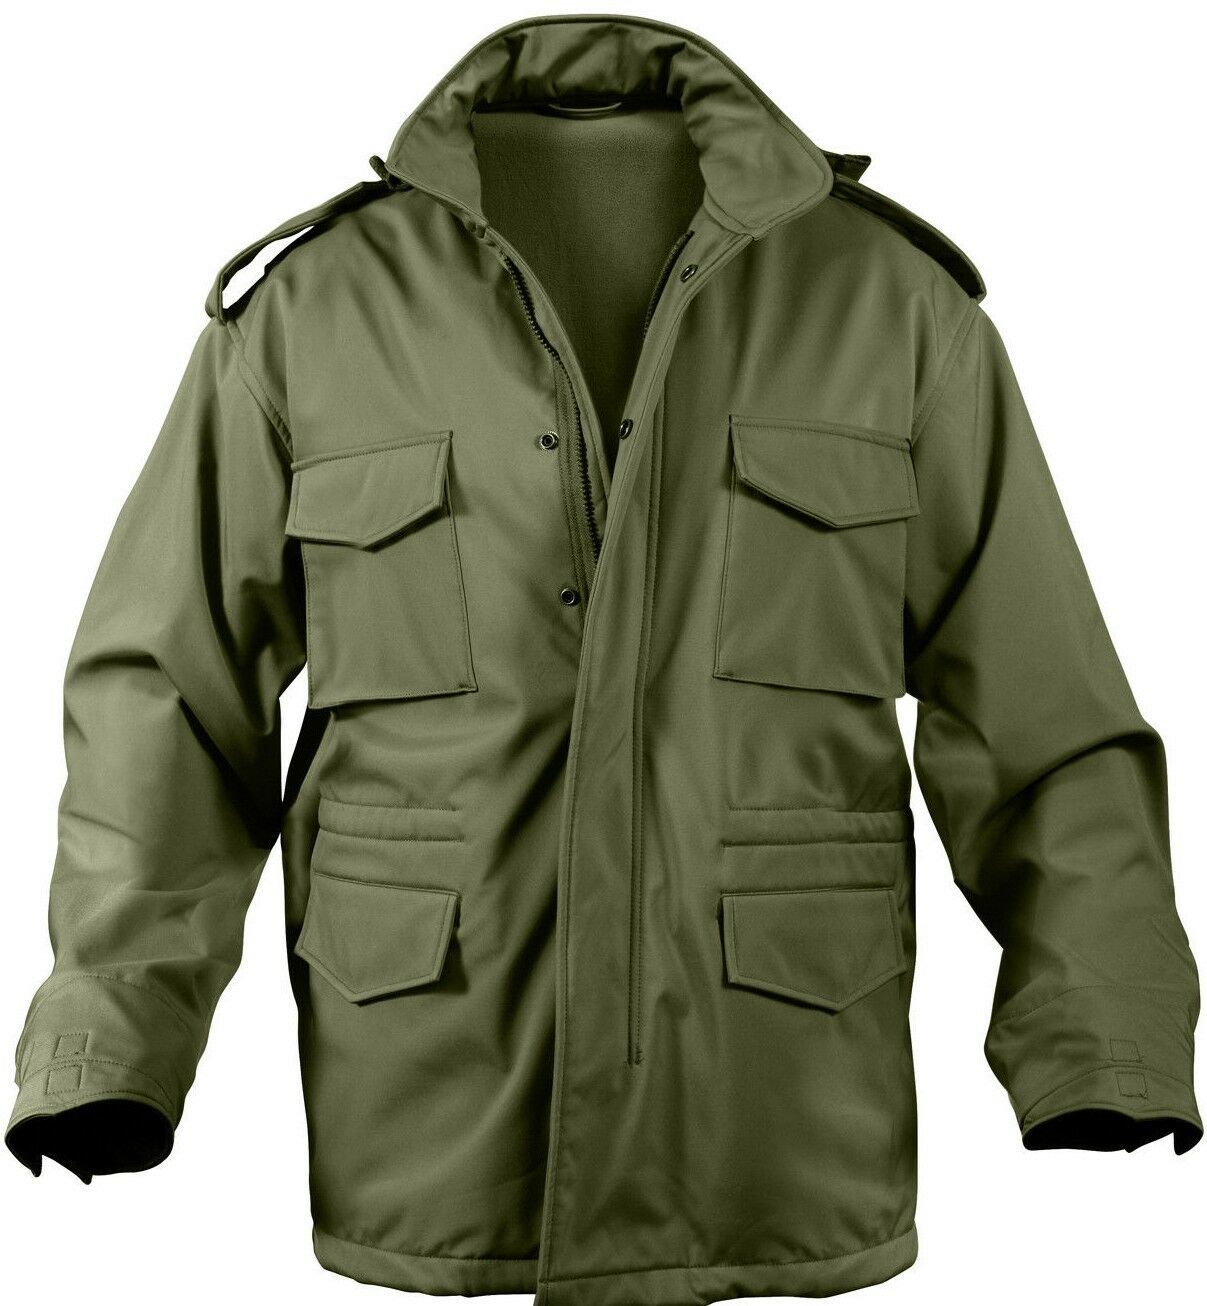 Soft Shell Waterproof Tactical Jacket Army M65 Military Light M-65 ...